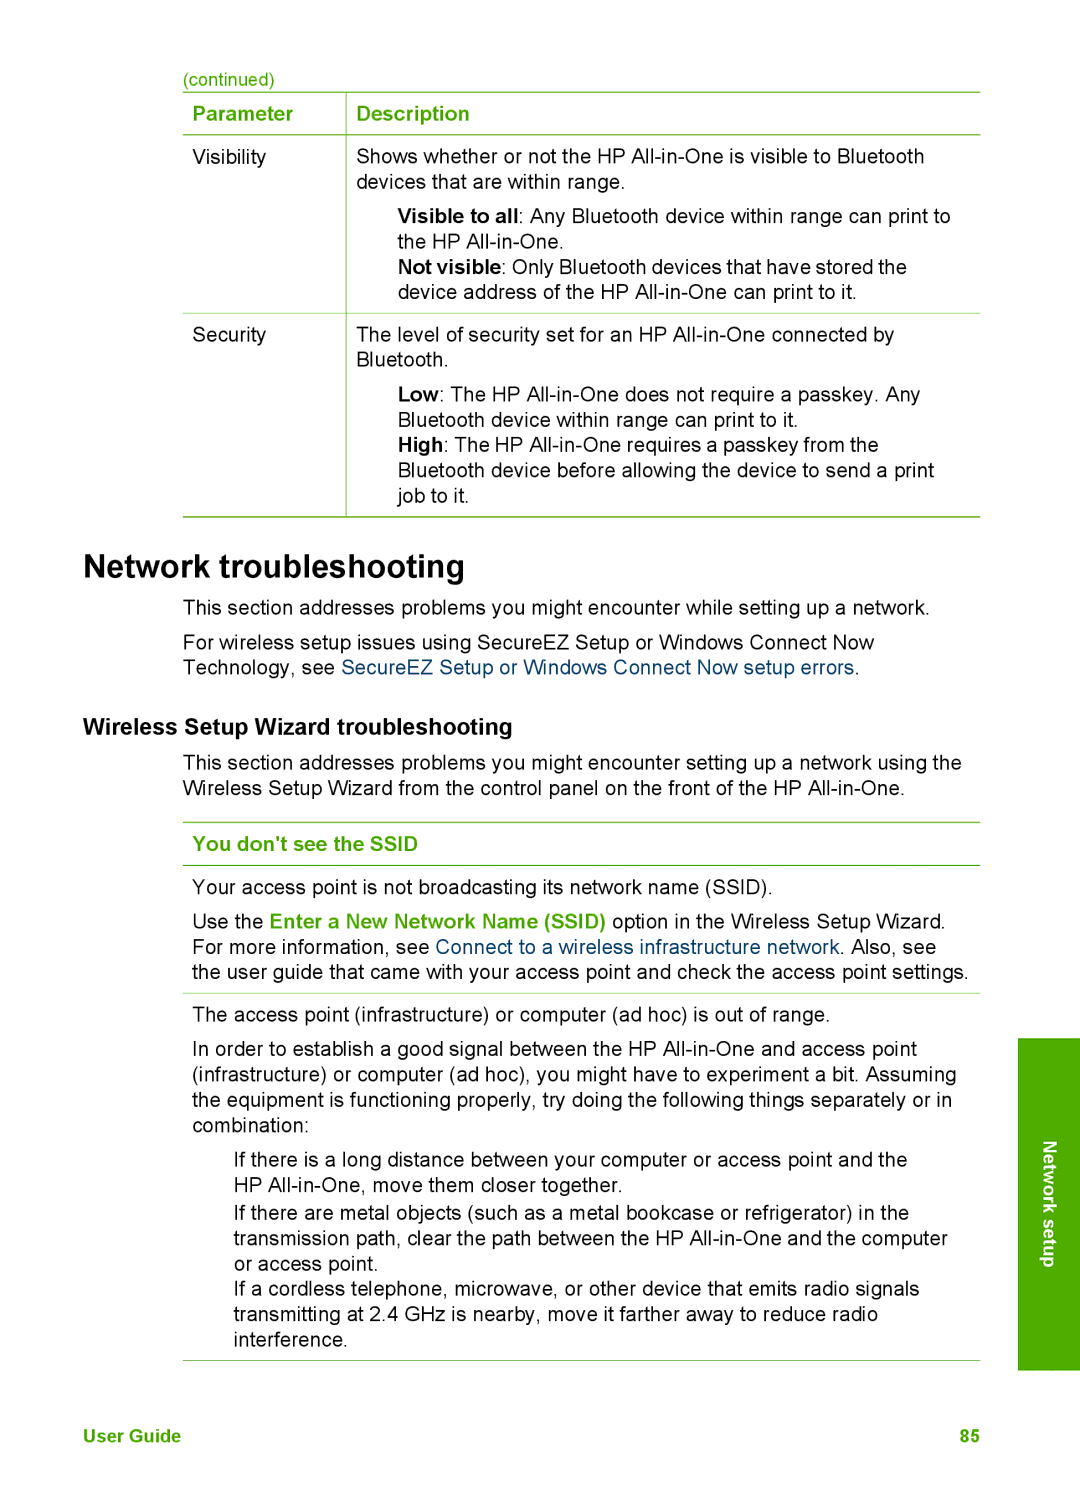 HP 3300 manual Network troubleshooting, Wireless Setup Wizard troubleshooting, You dont see the Ssid 